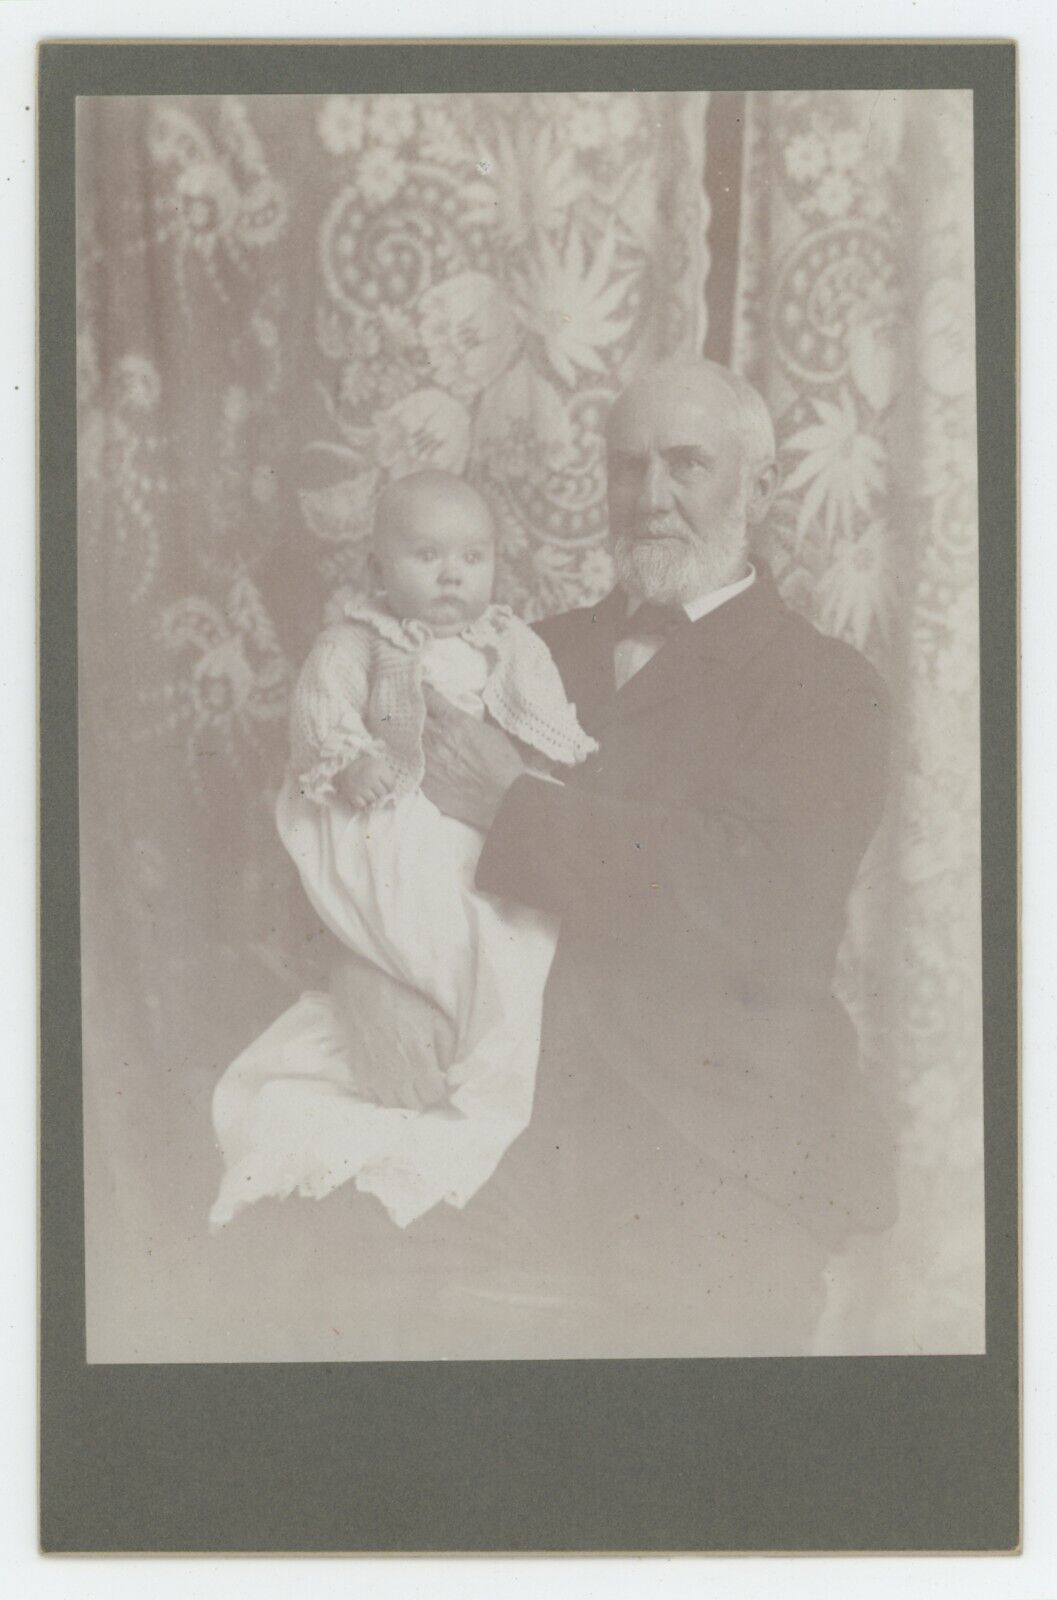 Antique Circa 1900s Cabinet Card Older Man With Beard Holding Adorable Baby